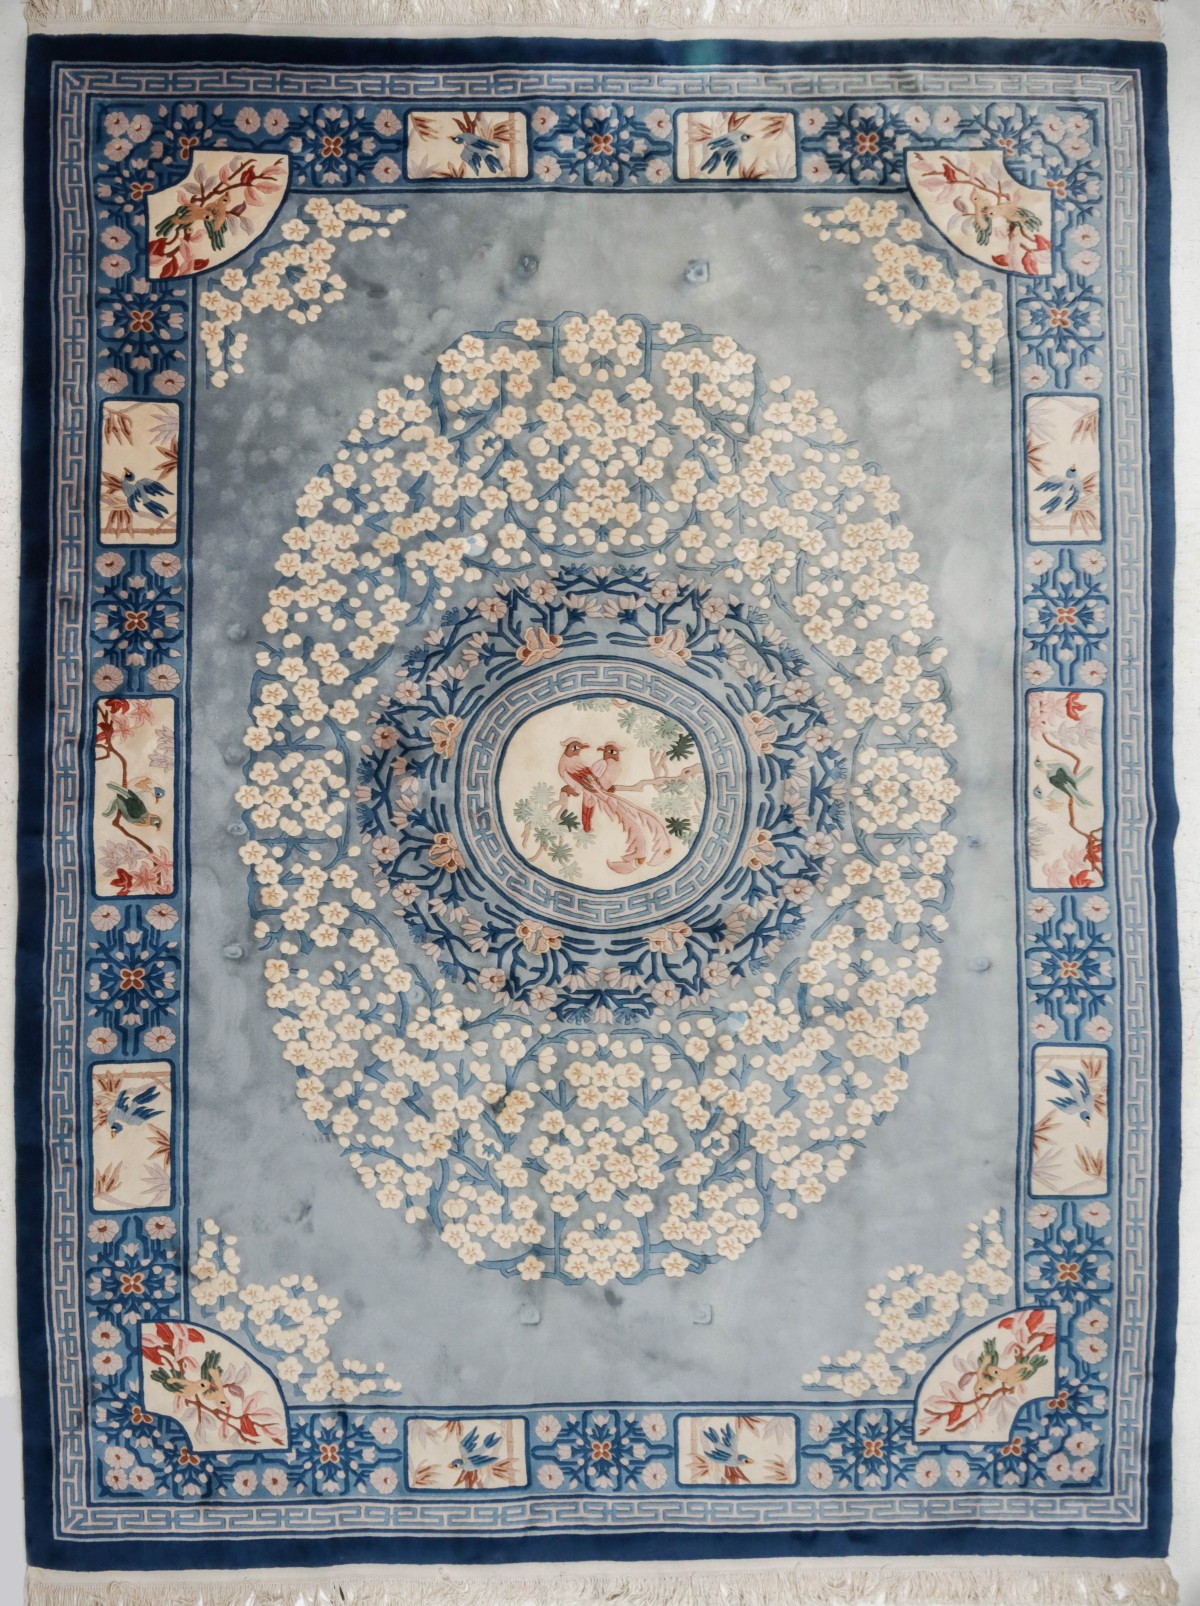 A VERY ELABORATE LATE 20TH CENTURY CHINESE CARPET